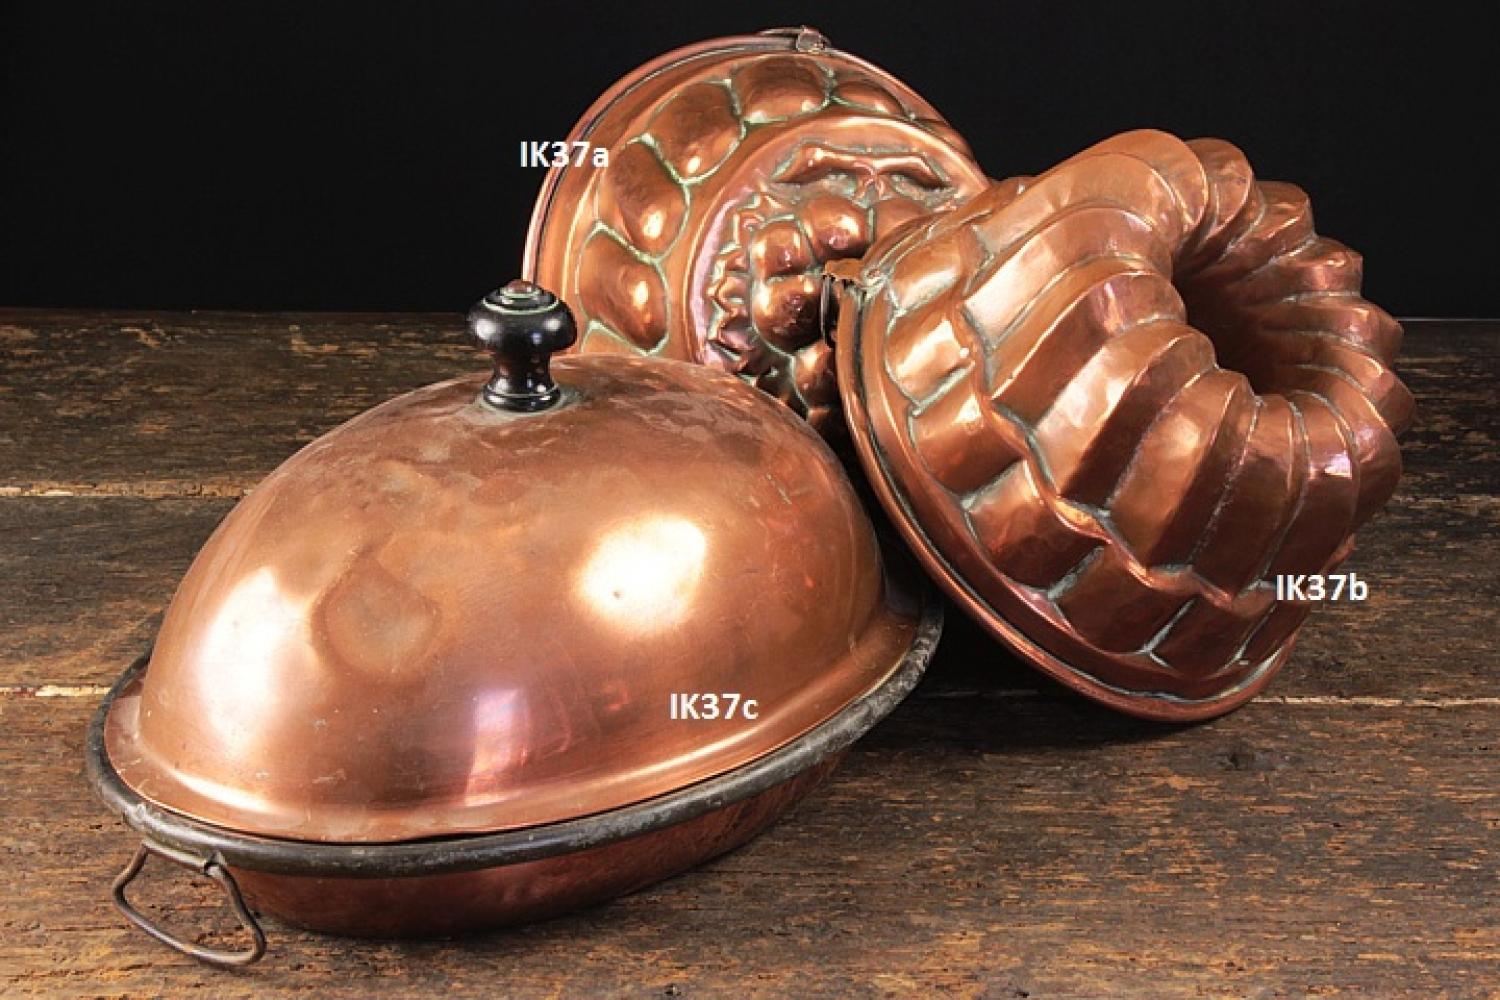 Beautiful old copper moulds and warming pan.
IK37a measures 7¼